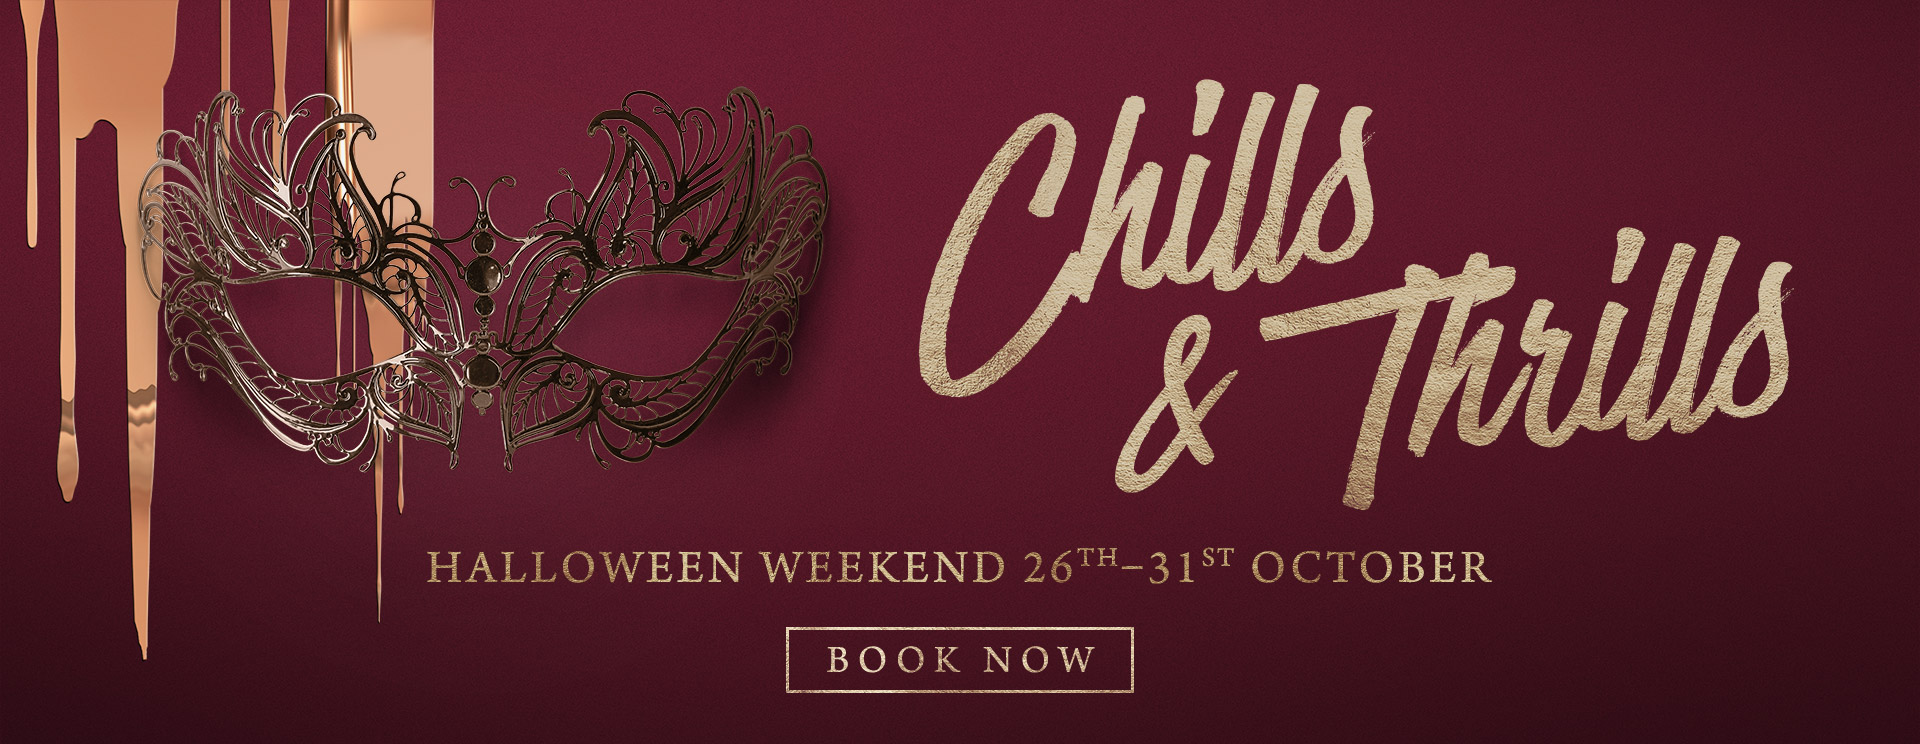 Chills & Thrills this Halloween at The Marchmont Arms